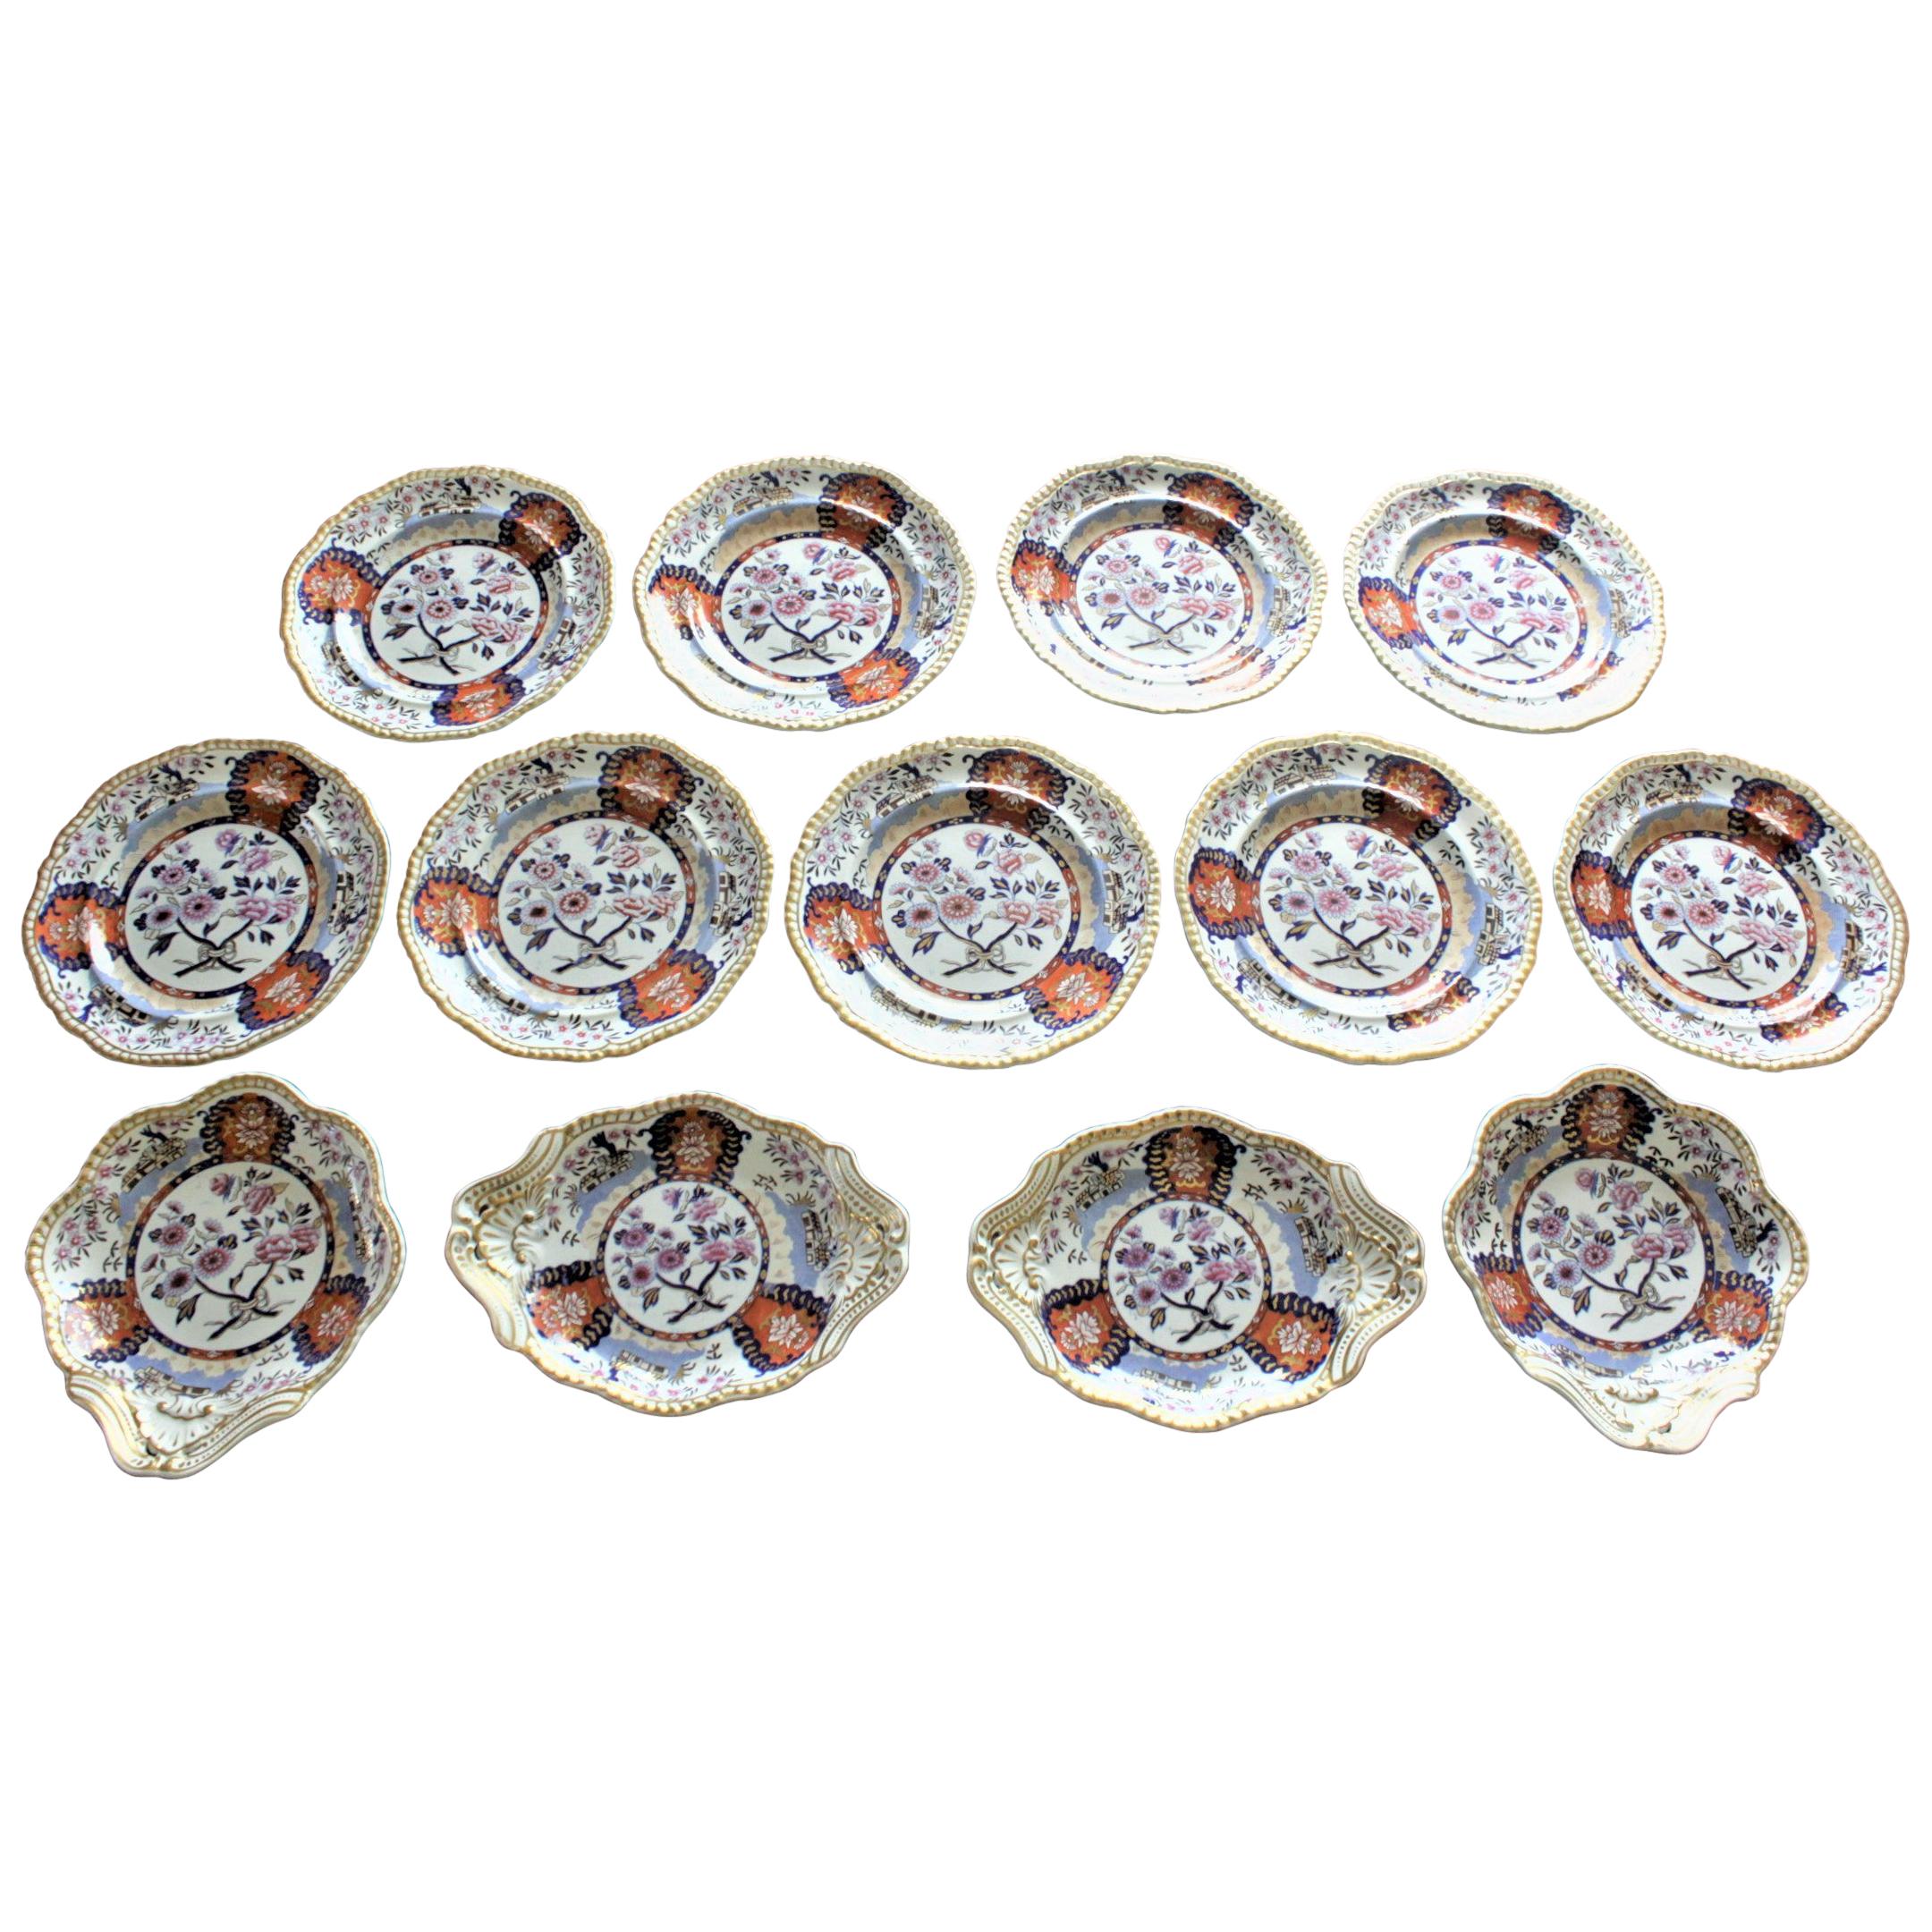 Antique Spode 'Imperial' Chinoiserie Styled 13 Piece Luncheon Set, Circa 1823